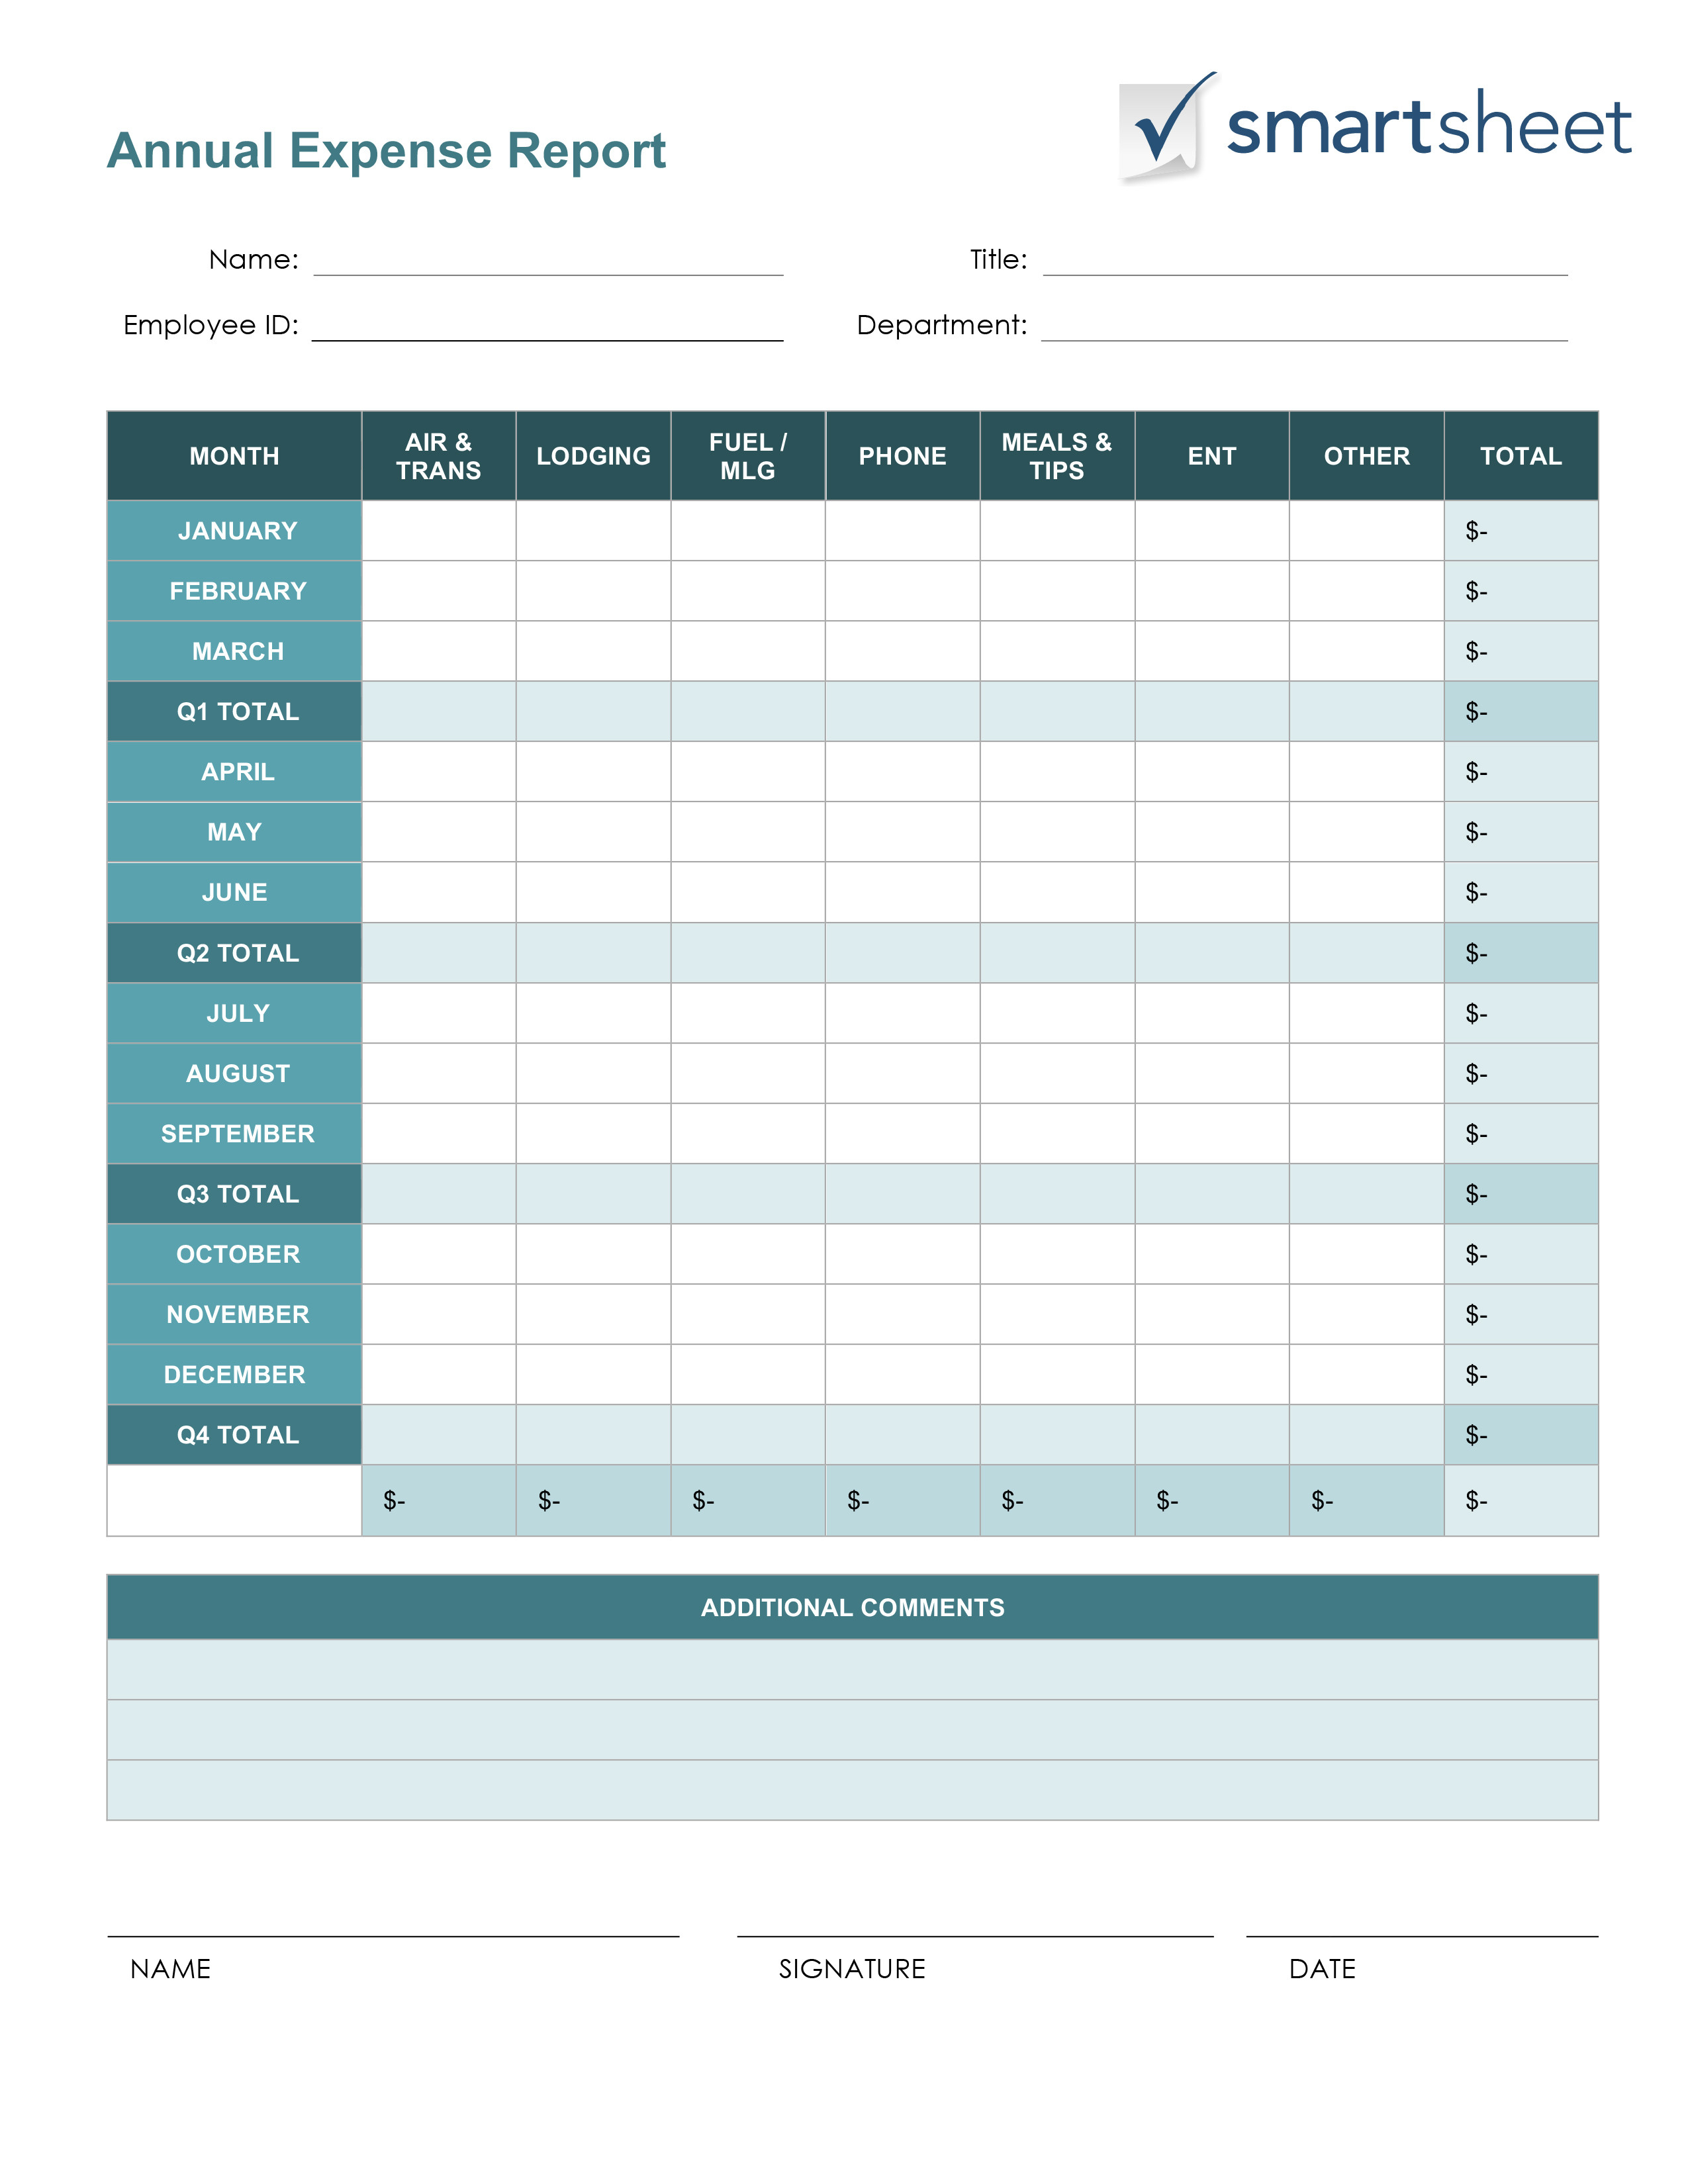 Business Expenses Spreadsheet Template Inspirational Yearly Expense to Business Expenses Spreadsheet Template